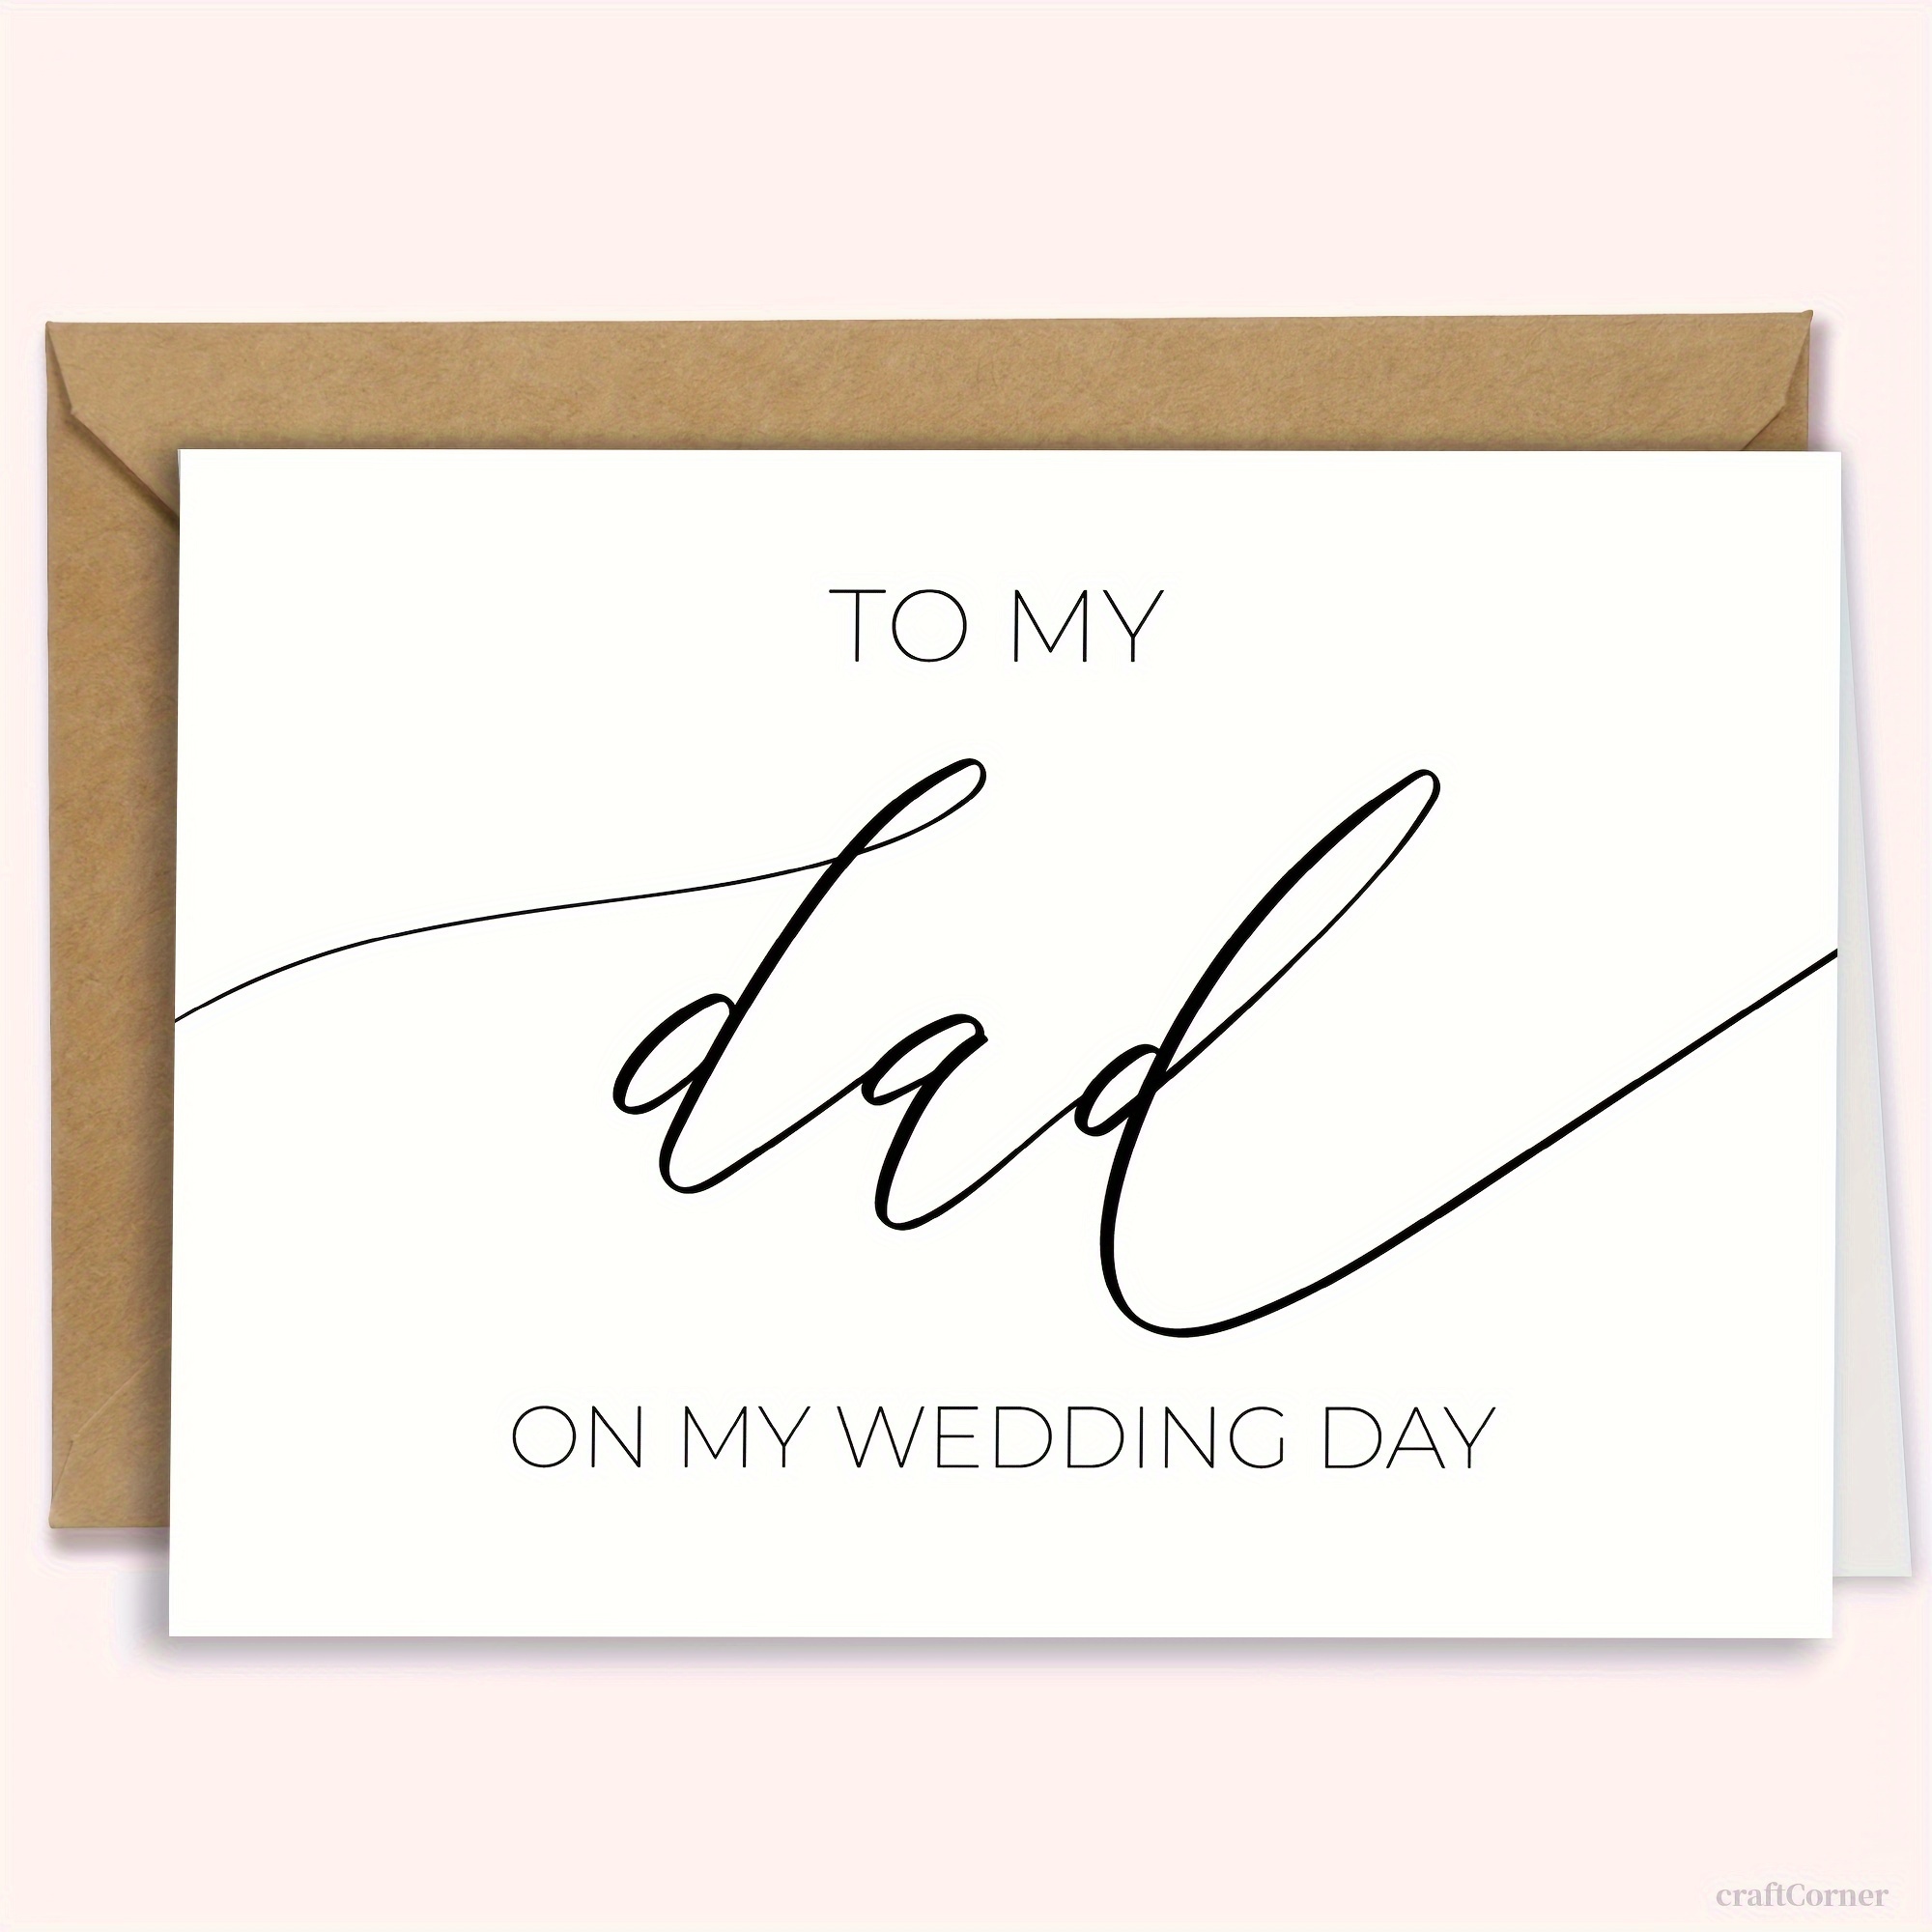 

1pc Wedding Day Greeting Card For Father - "to My Dad On My Wedding Day" Card In English With Envelope - Sentimental Keepsake For Dad From Bride Or Groom